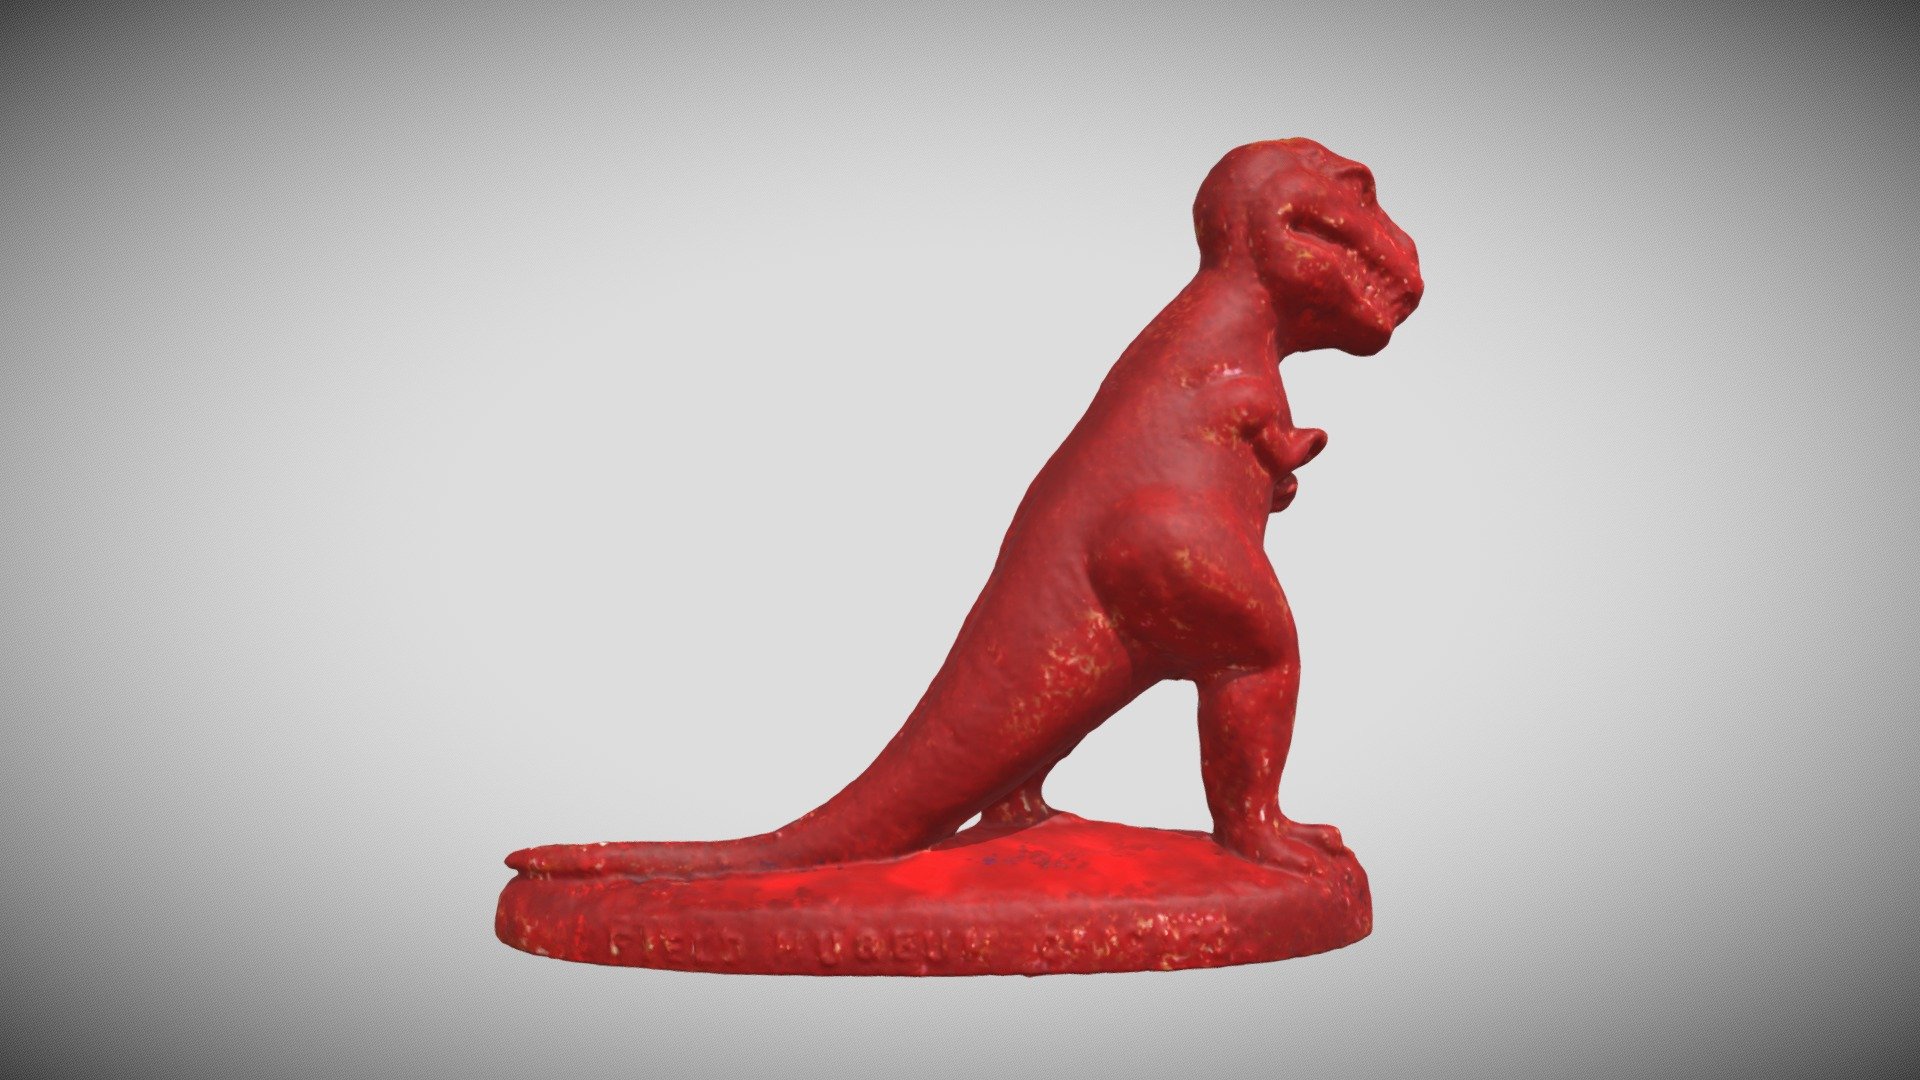 This figurine was generated with a Mold-A-Rama machine at the Field Museum in Chicago, Illinois on April 1, 2022. It was 3D scanned with a NextEngine Desktop 3D scanner 3d model